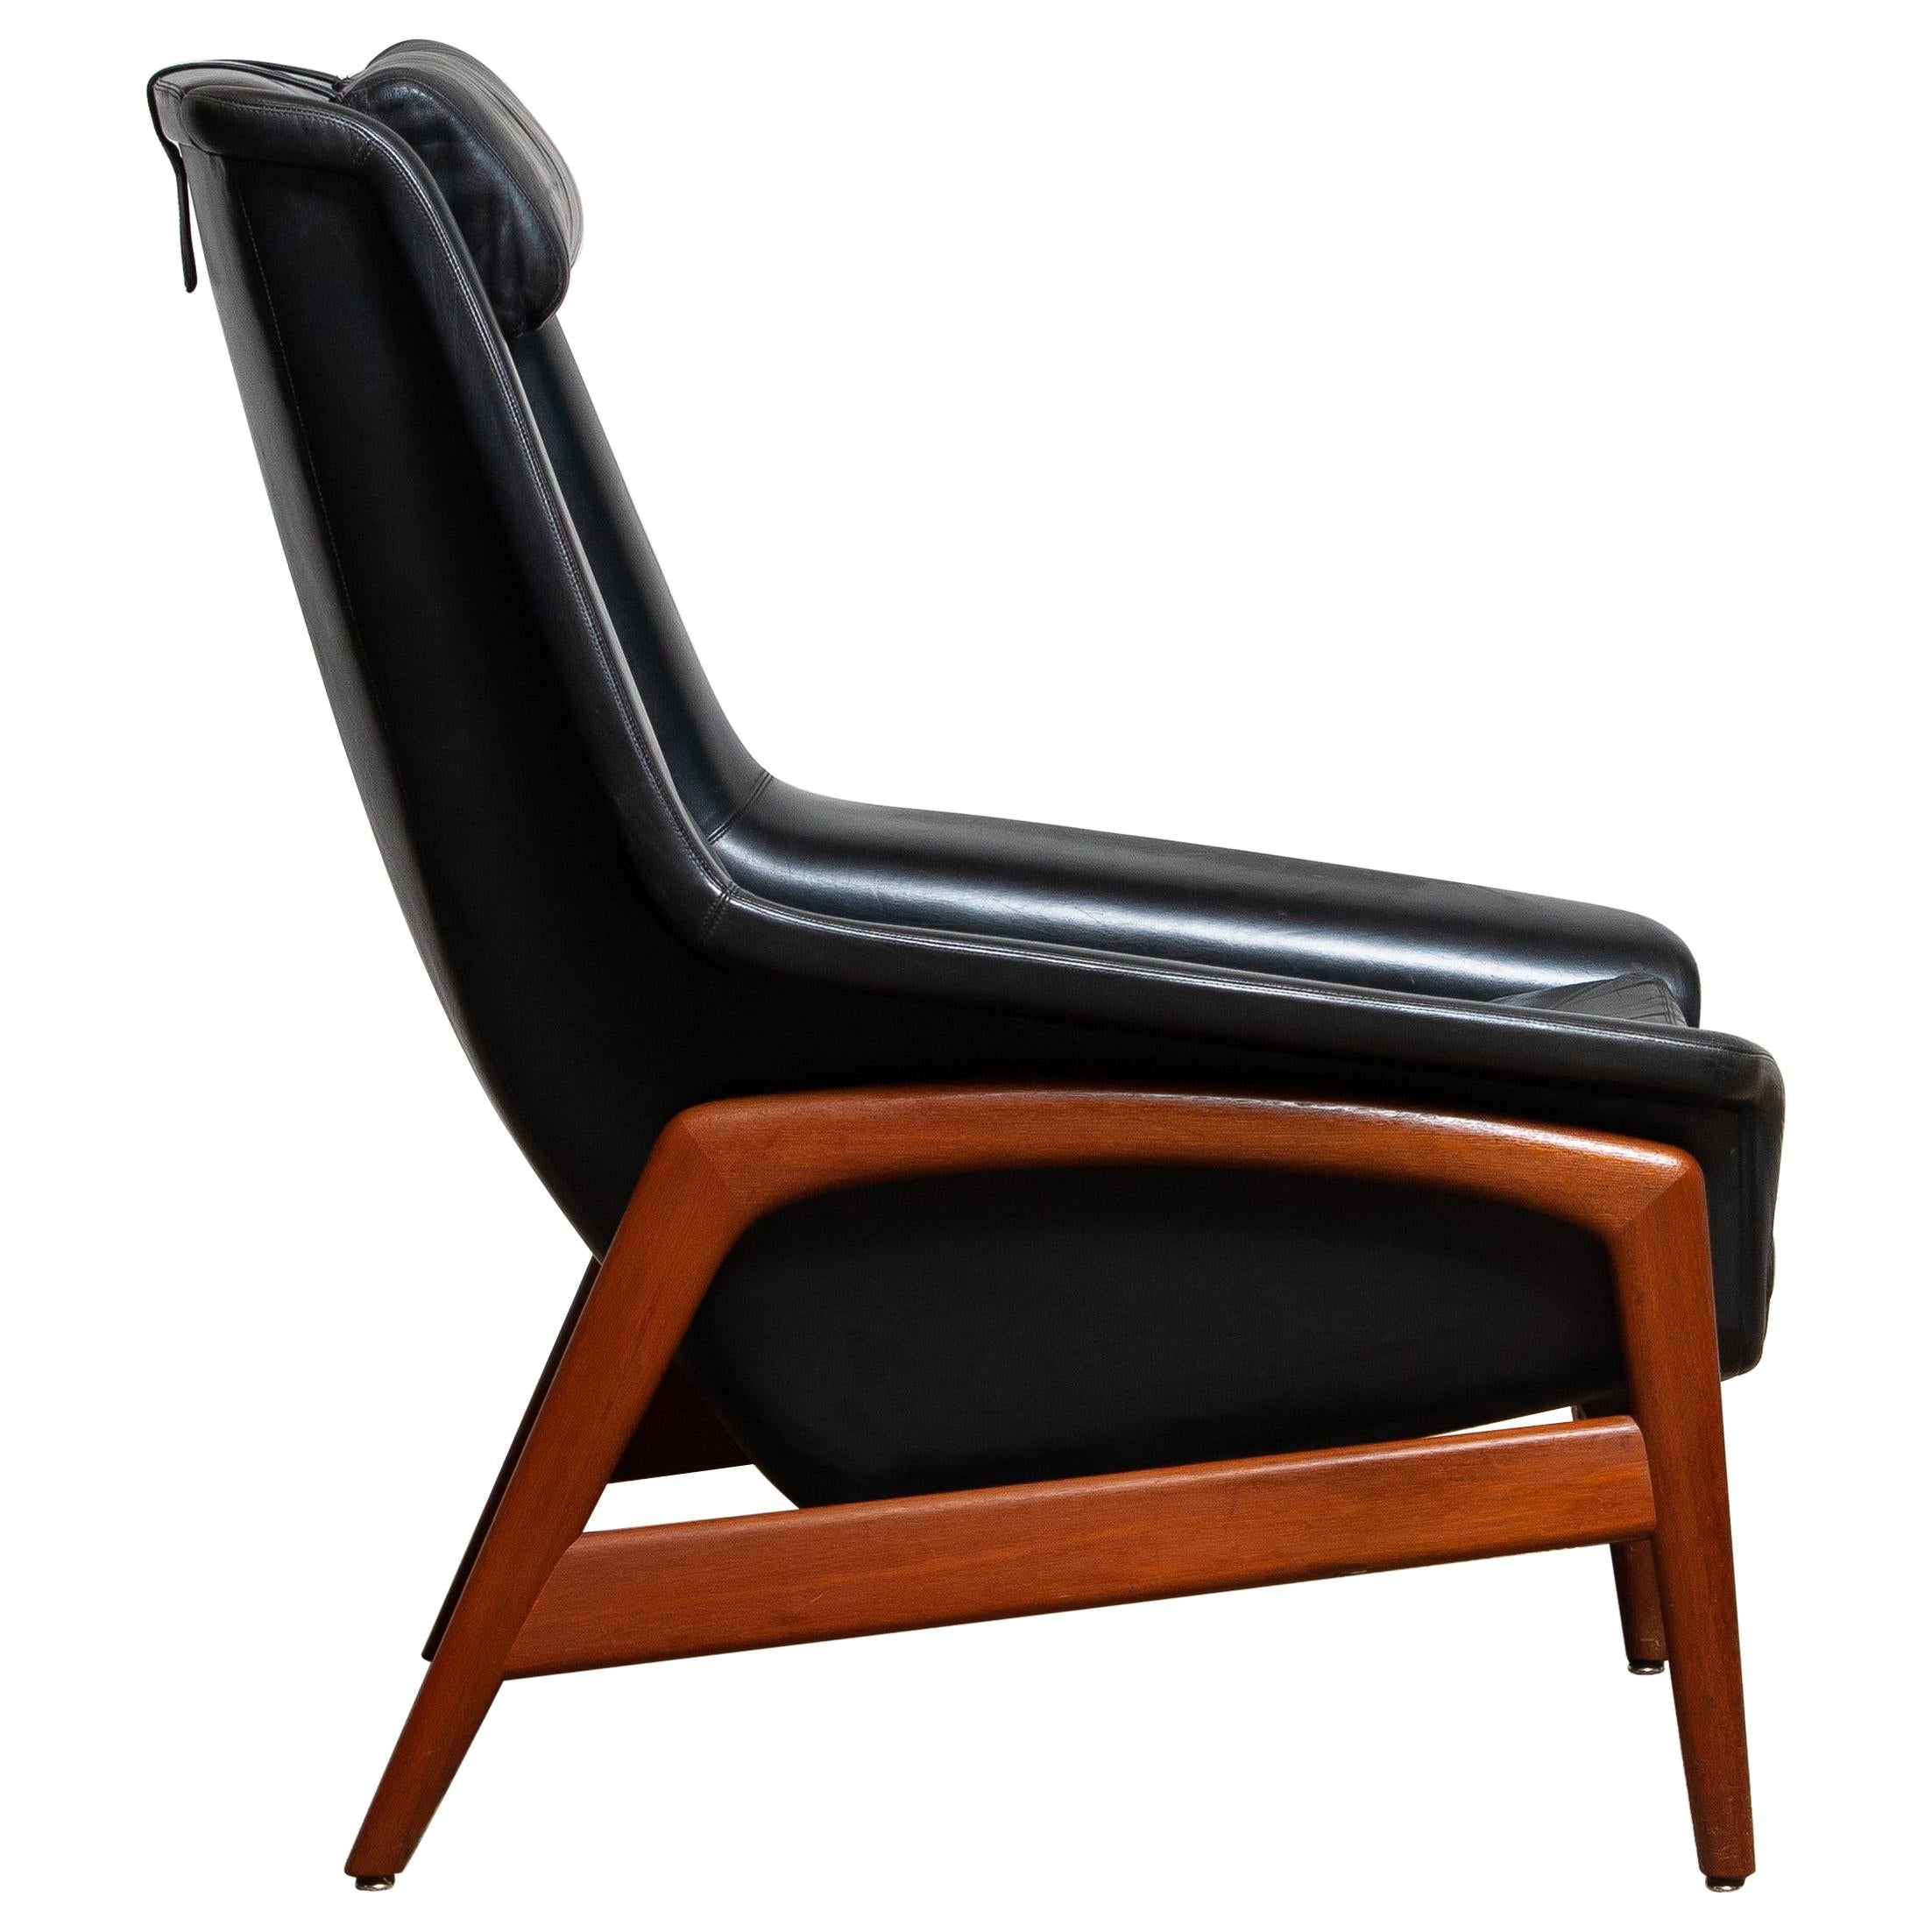 Stunning easy / lounge chair in teak and upholstered in black leather by Folke Ohlsson for DUX, Sweden,
Model; Profile
Overall in good condition.